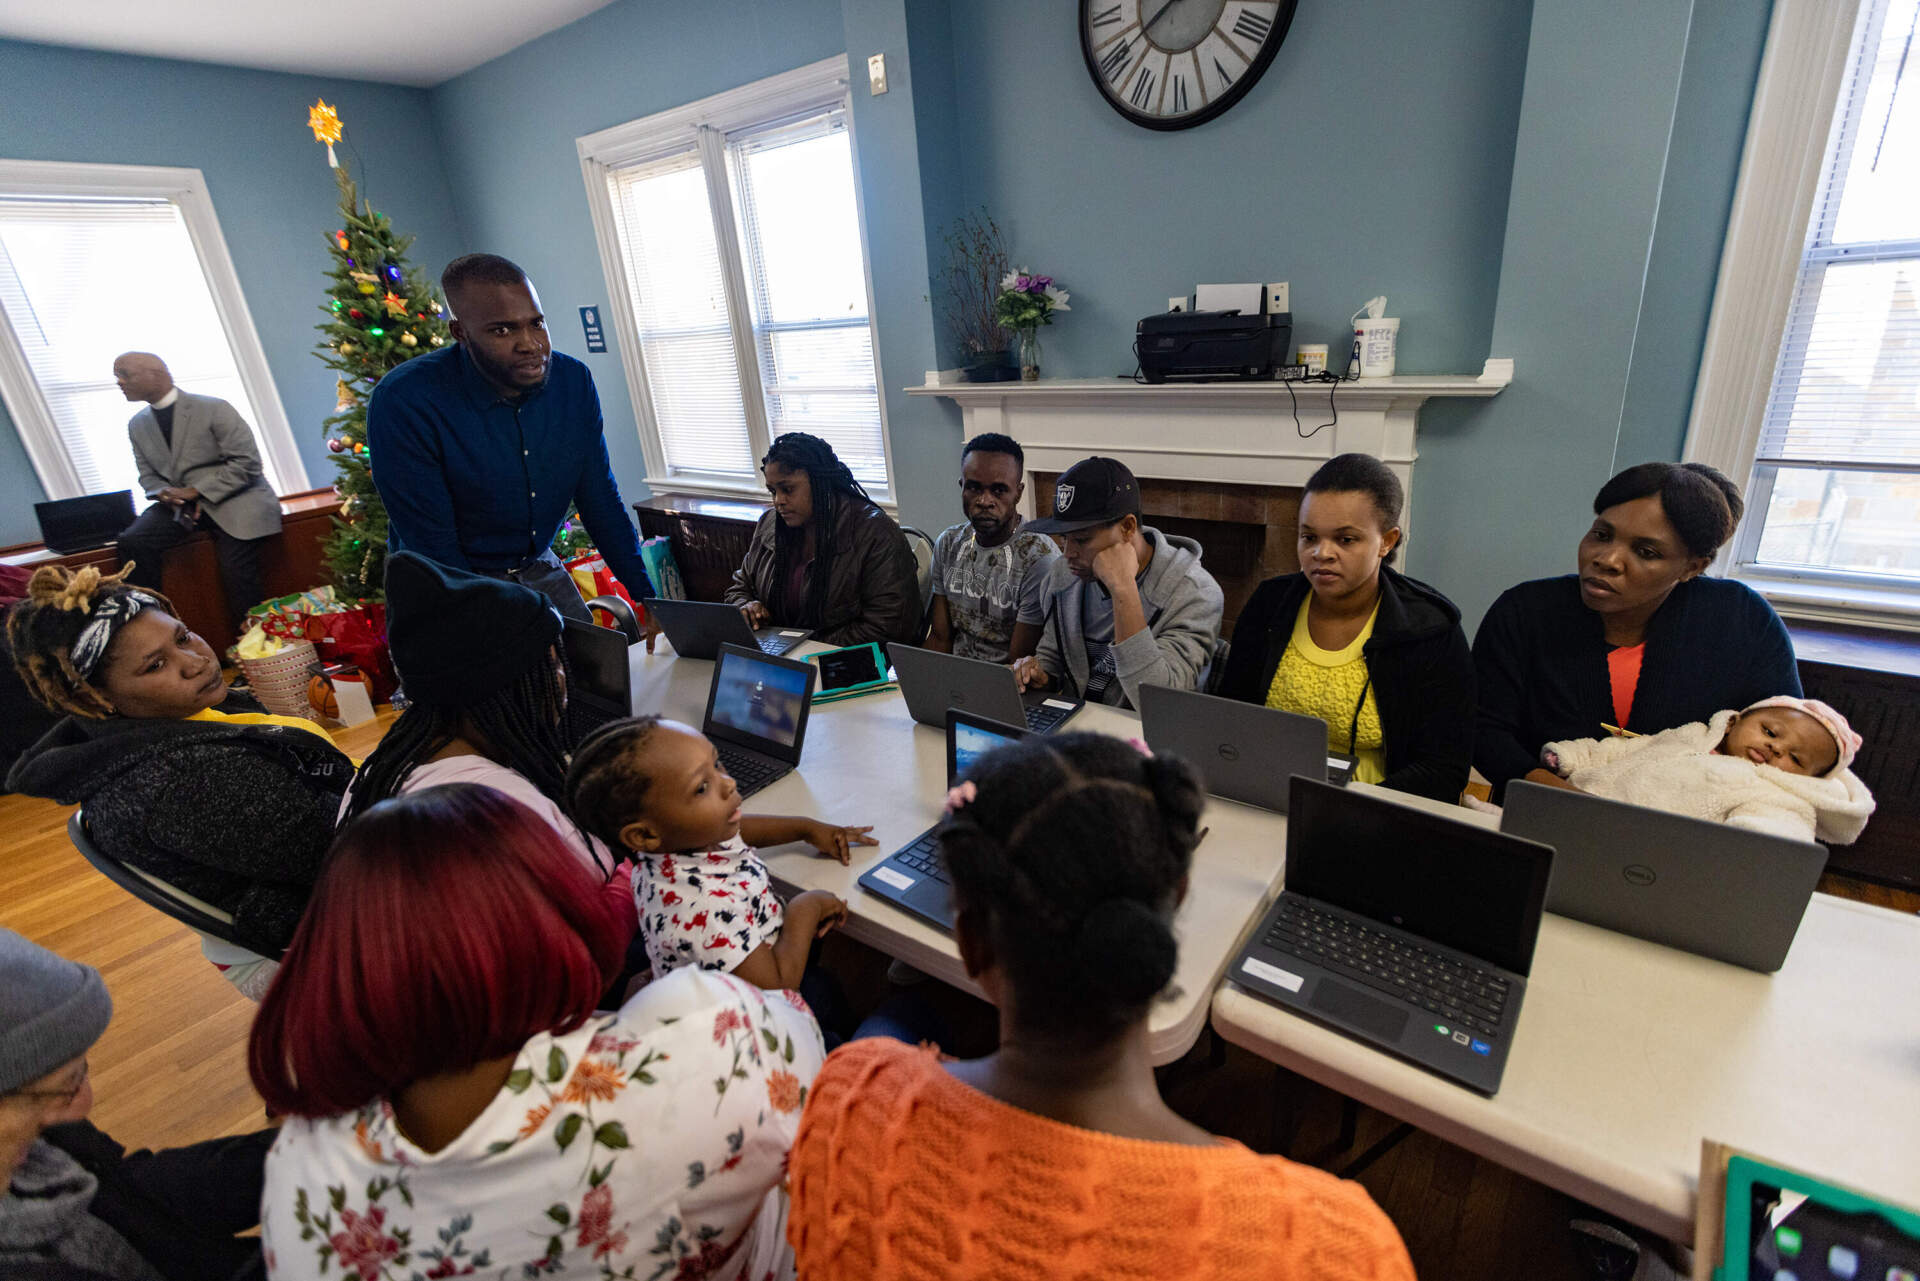 Huguens Altidor leads a computer skills class with a group migrants recently taken in by the Bethel AME Church in Jamaica Plain. (Jesse Costa/WBUR)